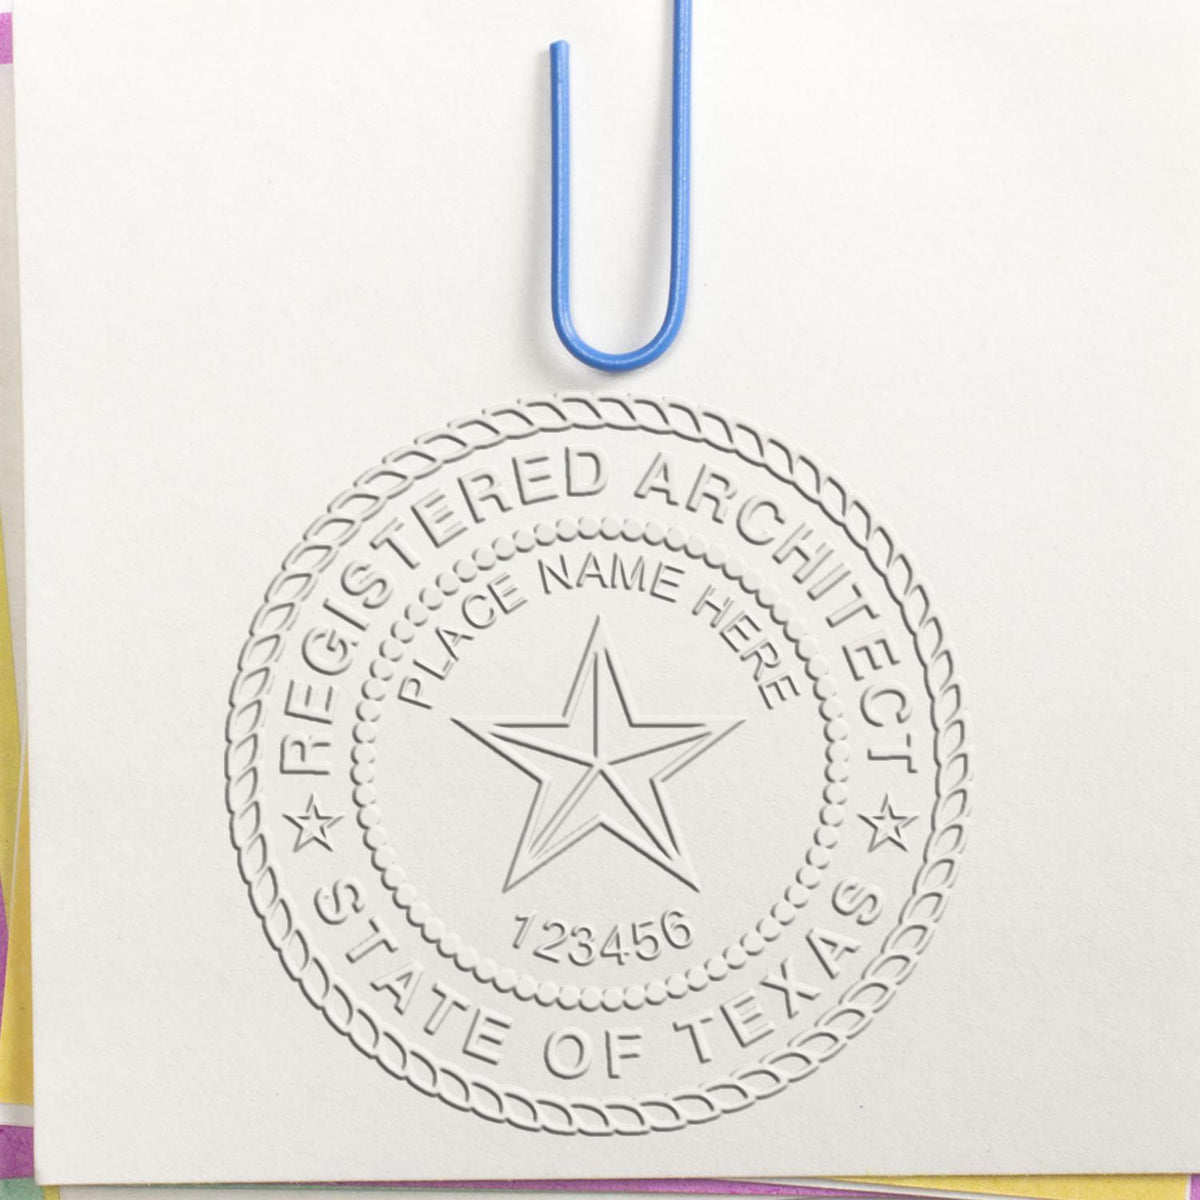 A stamped impression of the Texas Desk Architect Embossing Seal in this stylish lifestyle photo, setting the tone for a unique and personalized product.